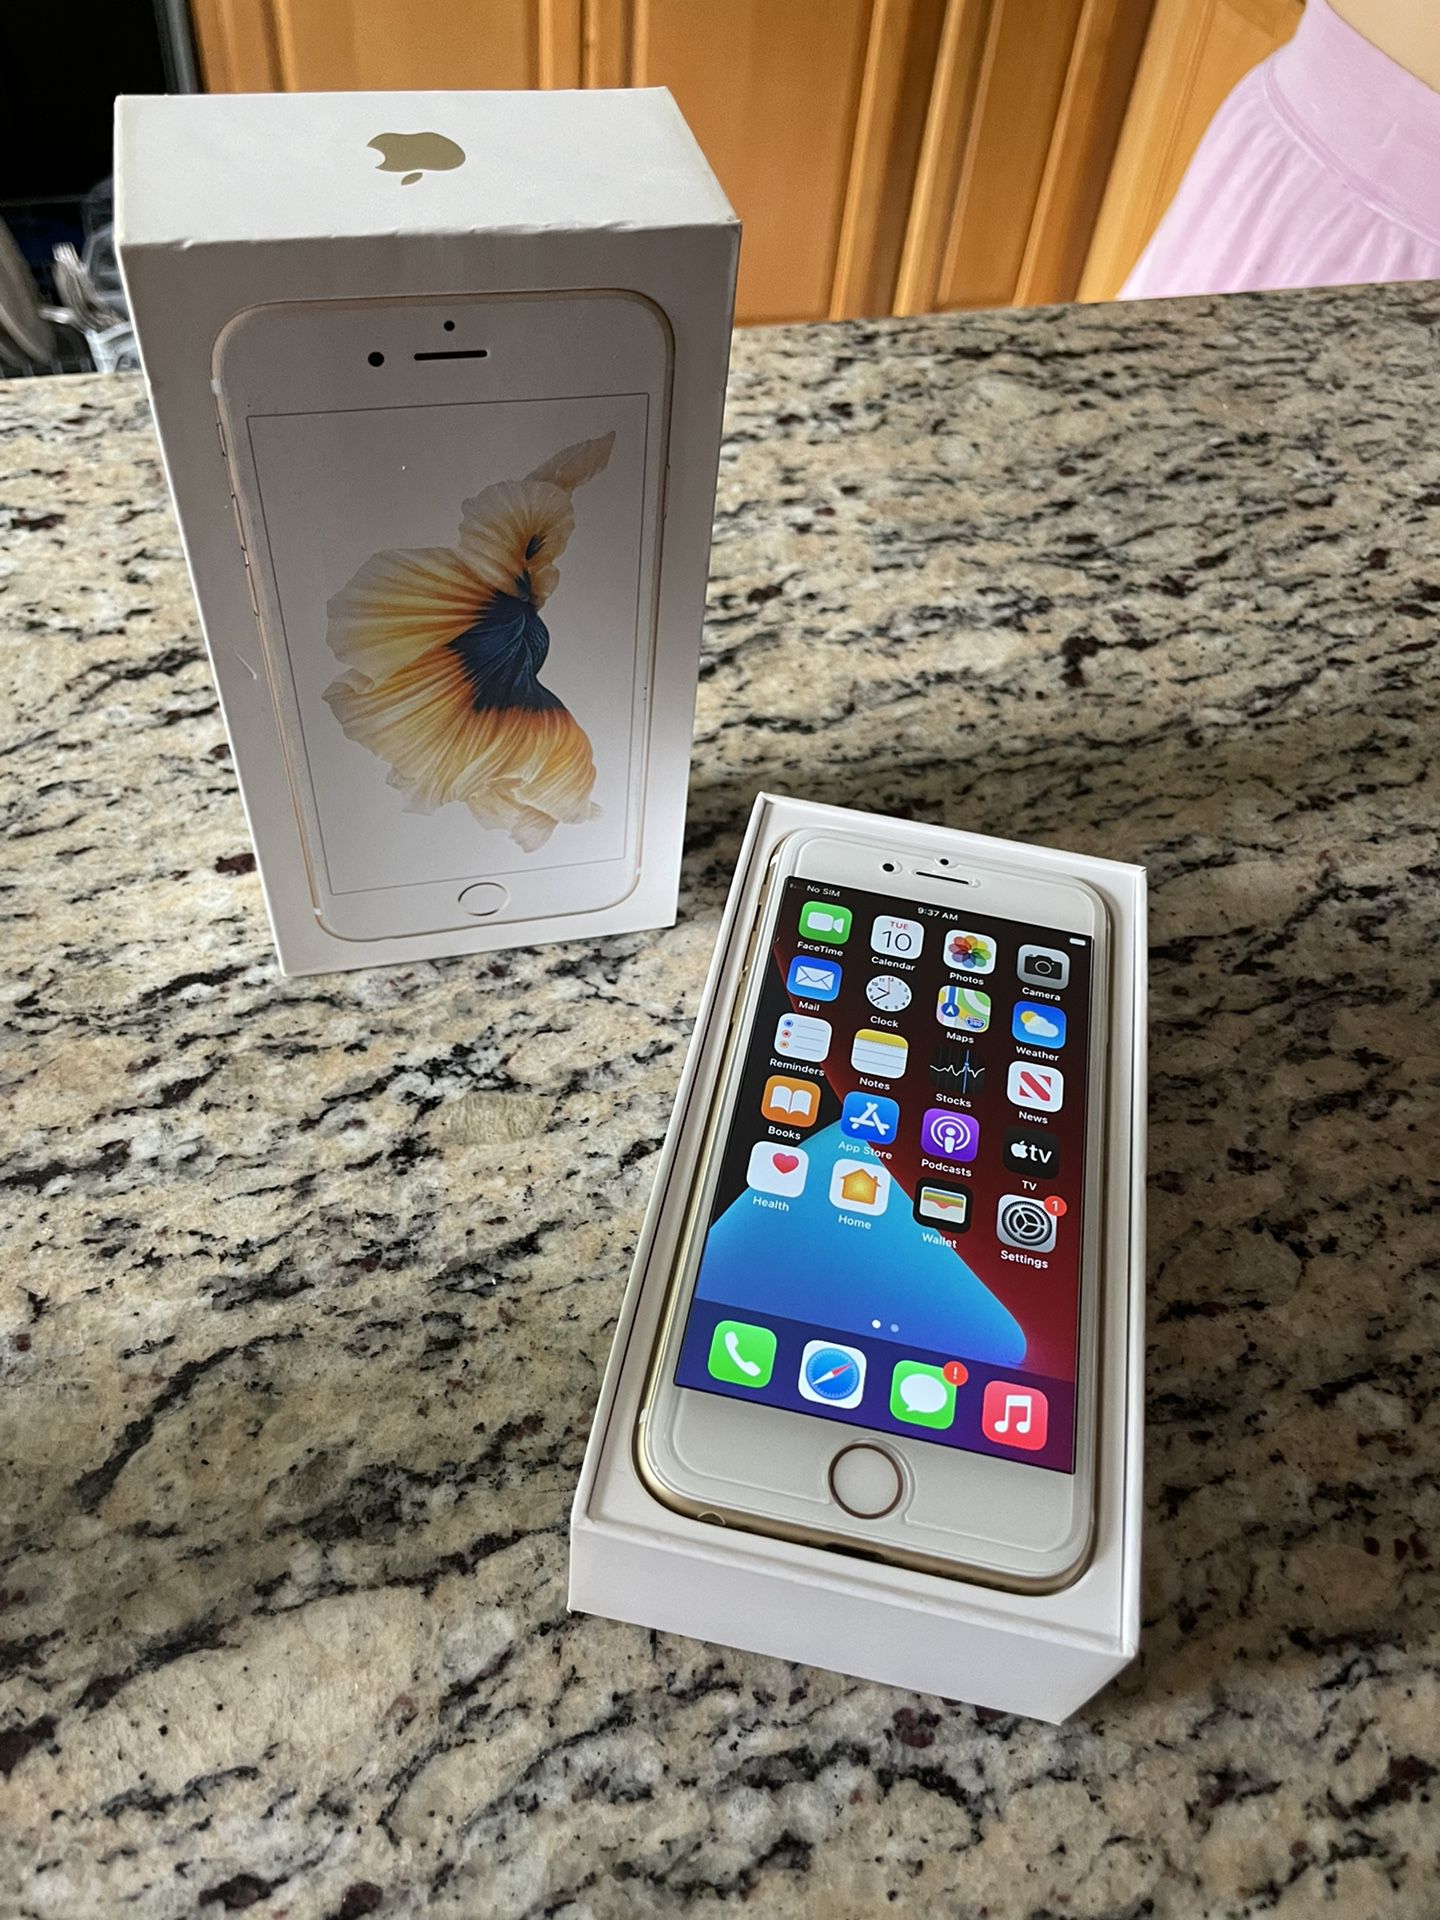 iPhone 6S 64GB Unlocked W/Box, New Charger And Tempered Glass Screen Protector Installed